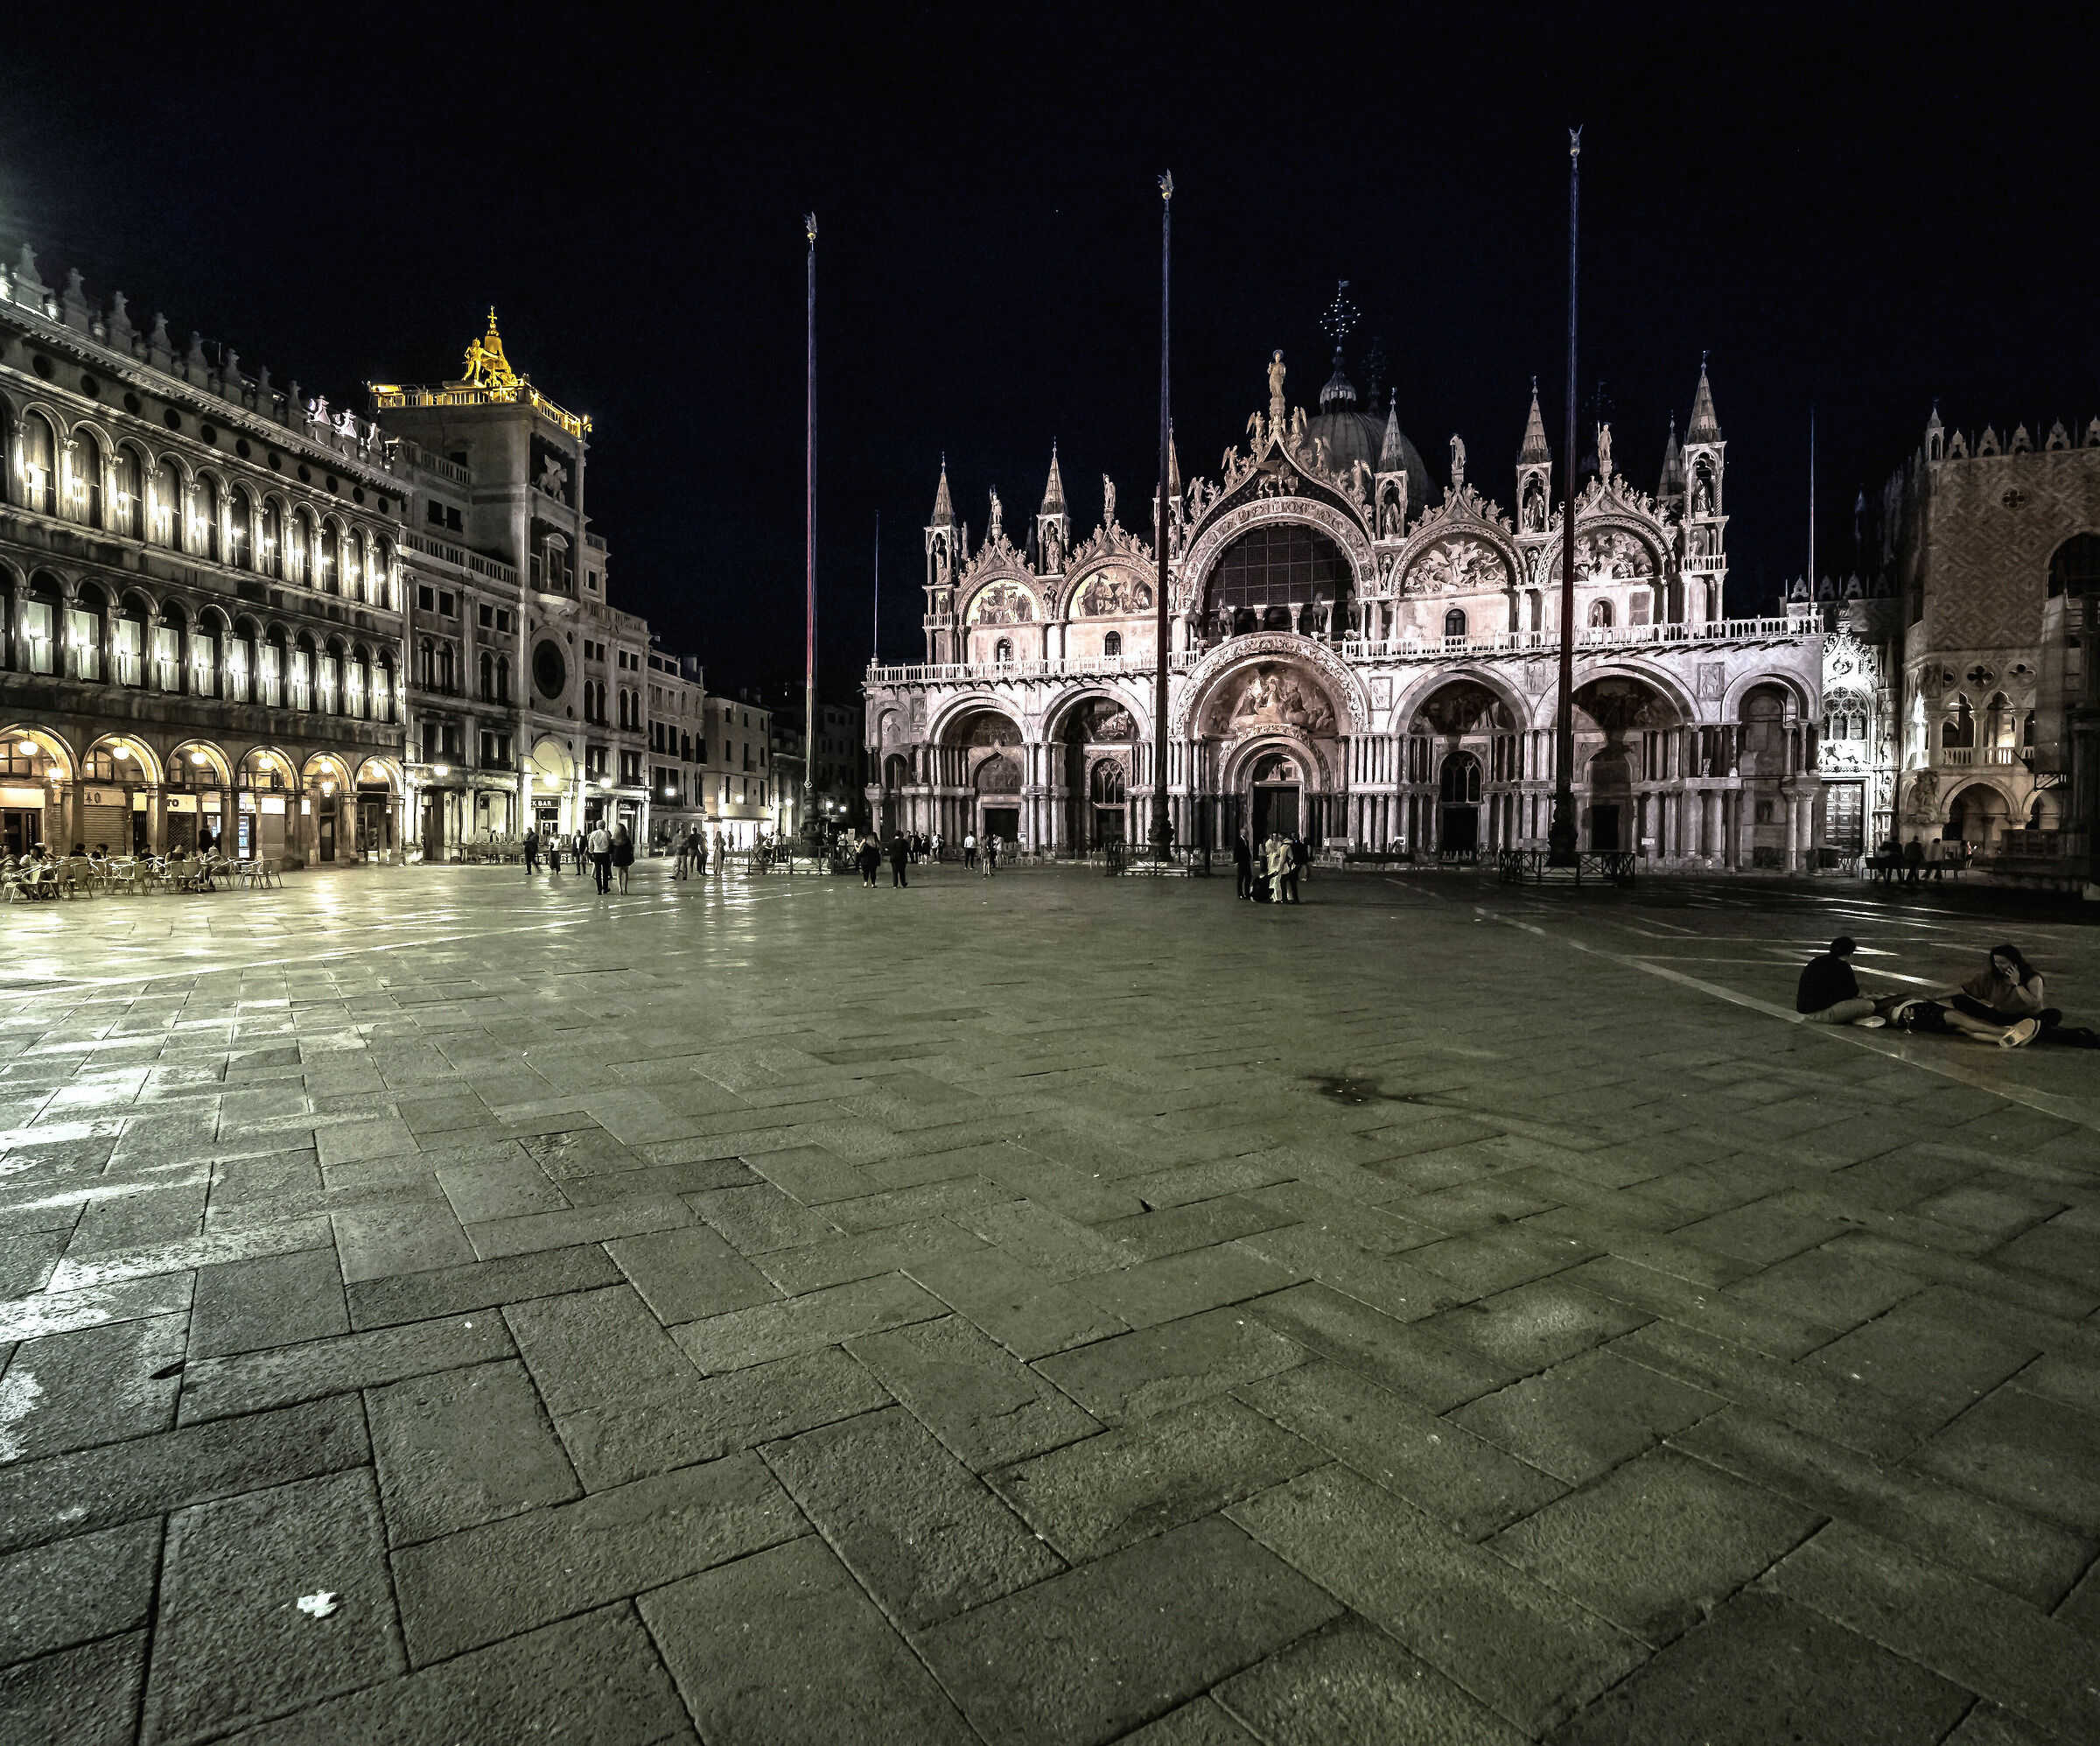 St Mark's Square by night...